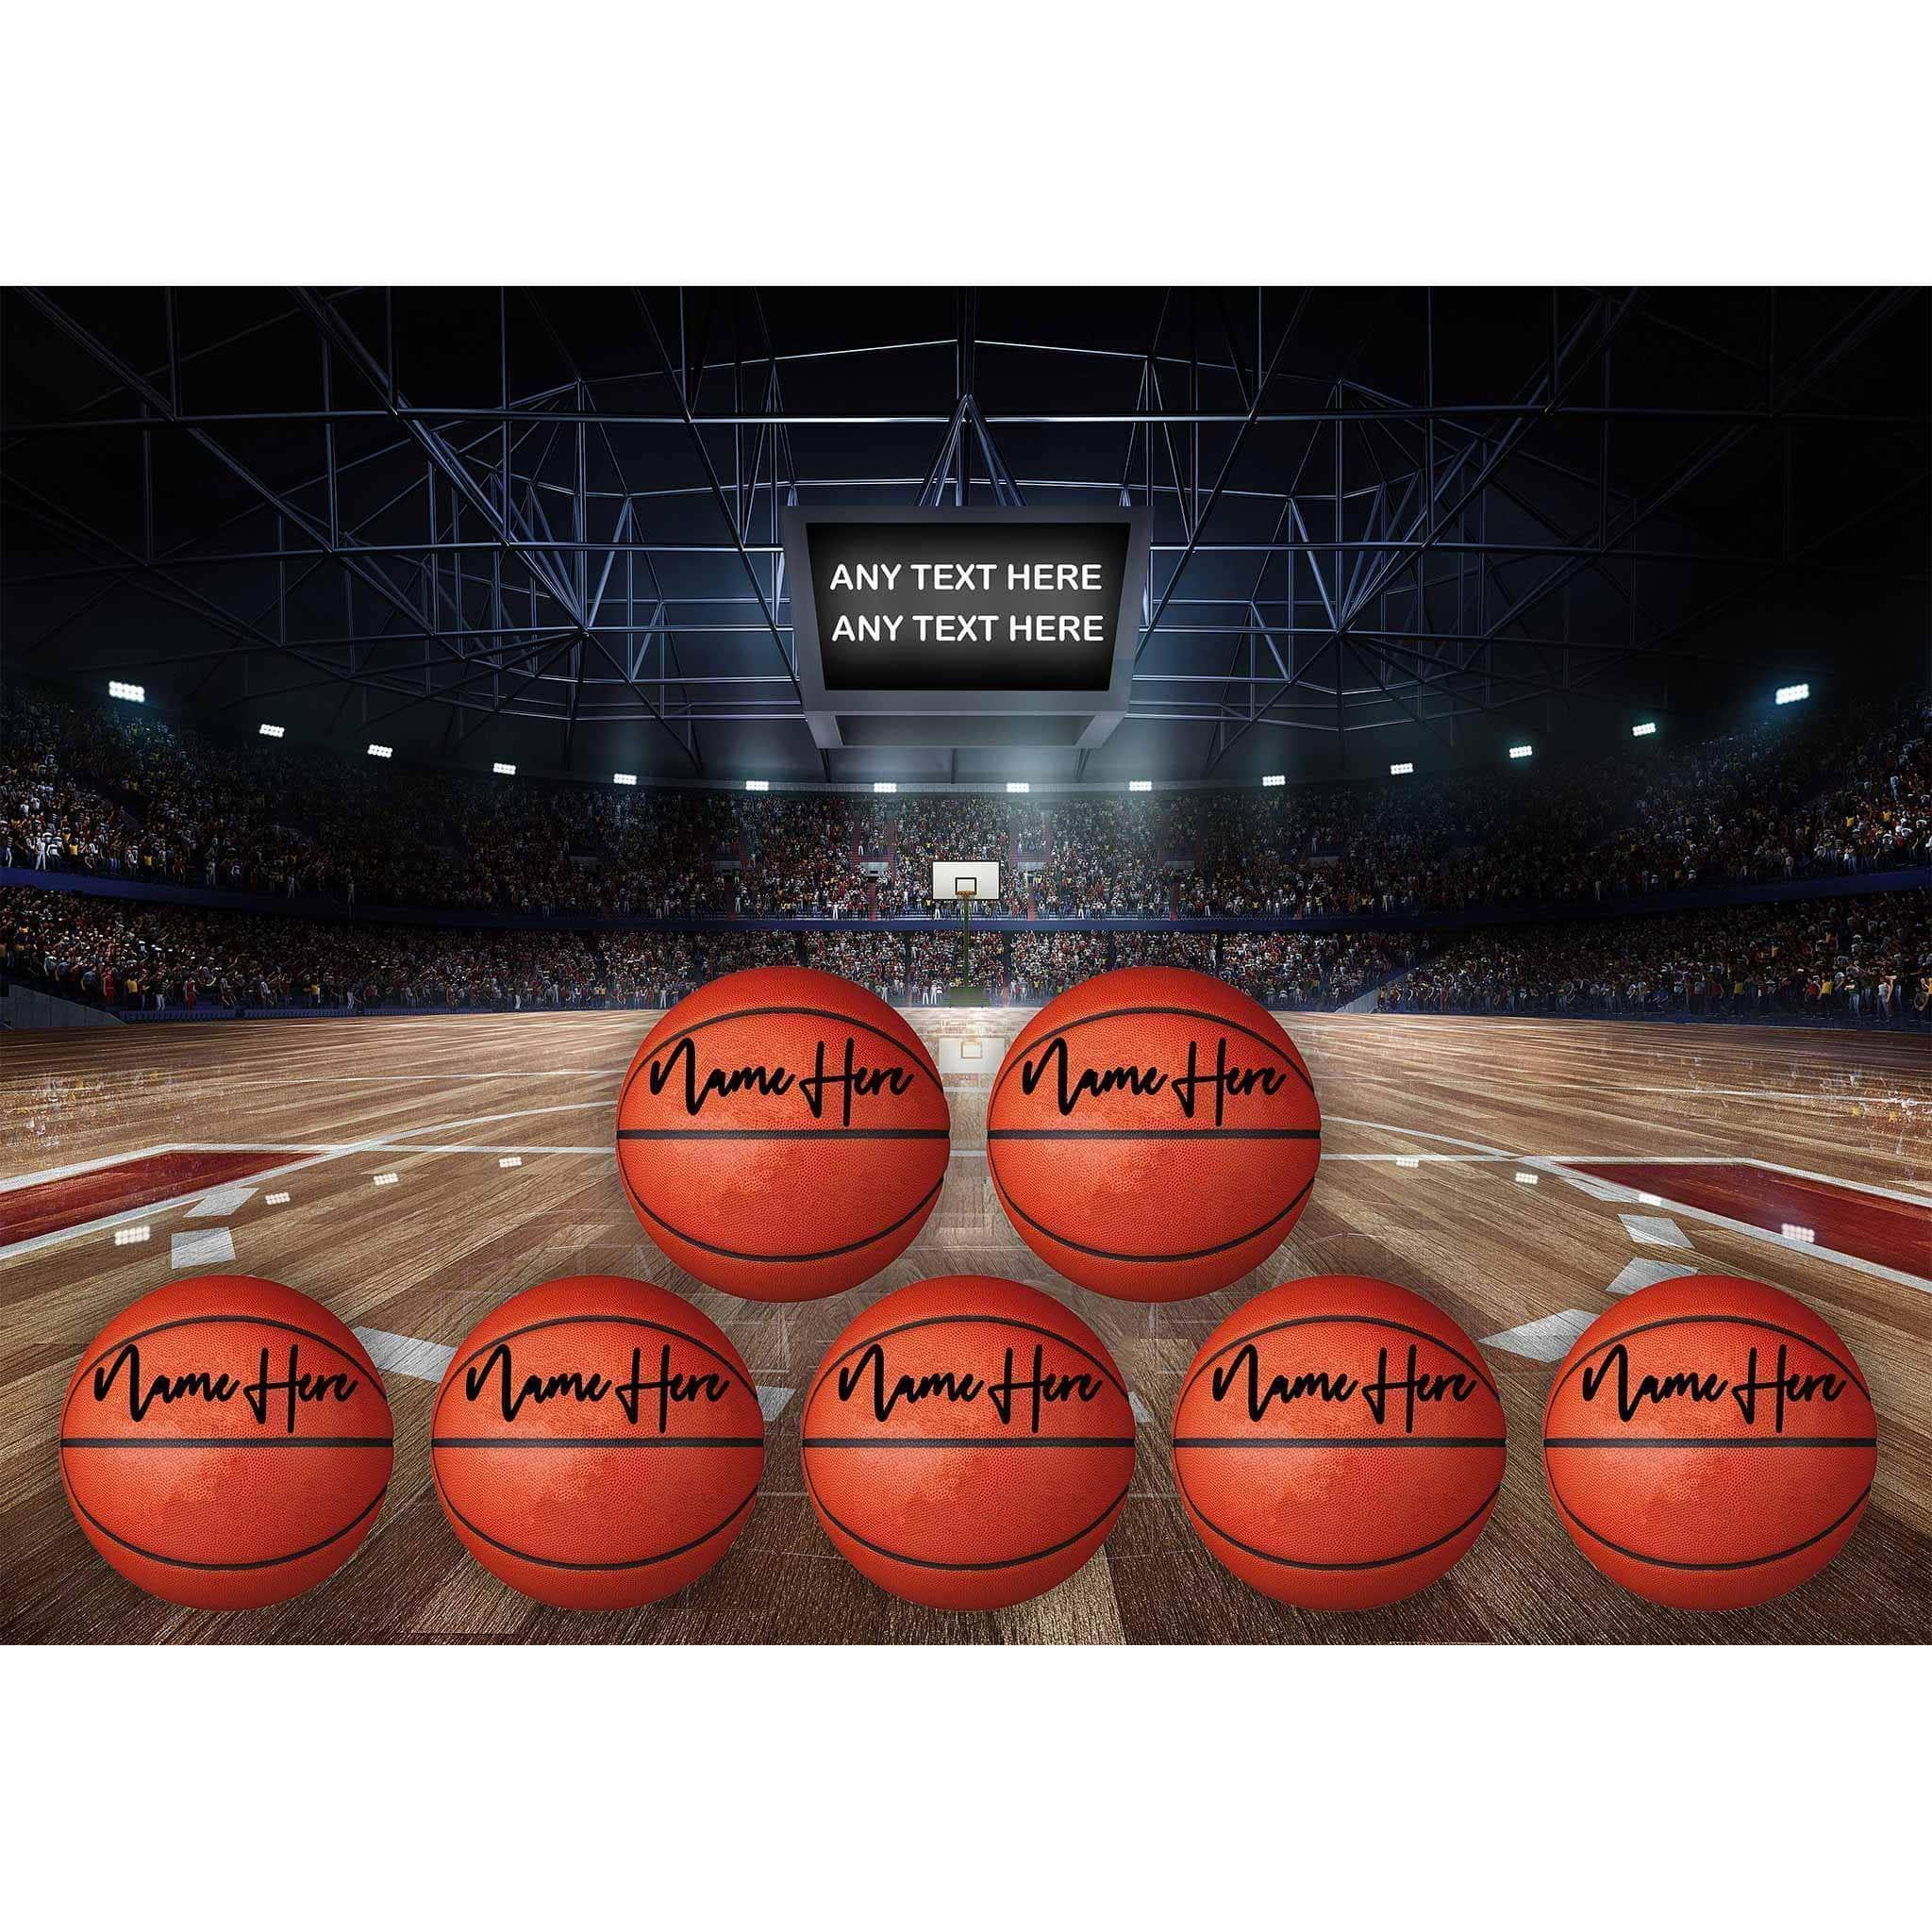 Basketball Arena V1 Multiple Names Personalized Basketballs And Scoreboard Sign CanvasCustomly Gifts